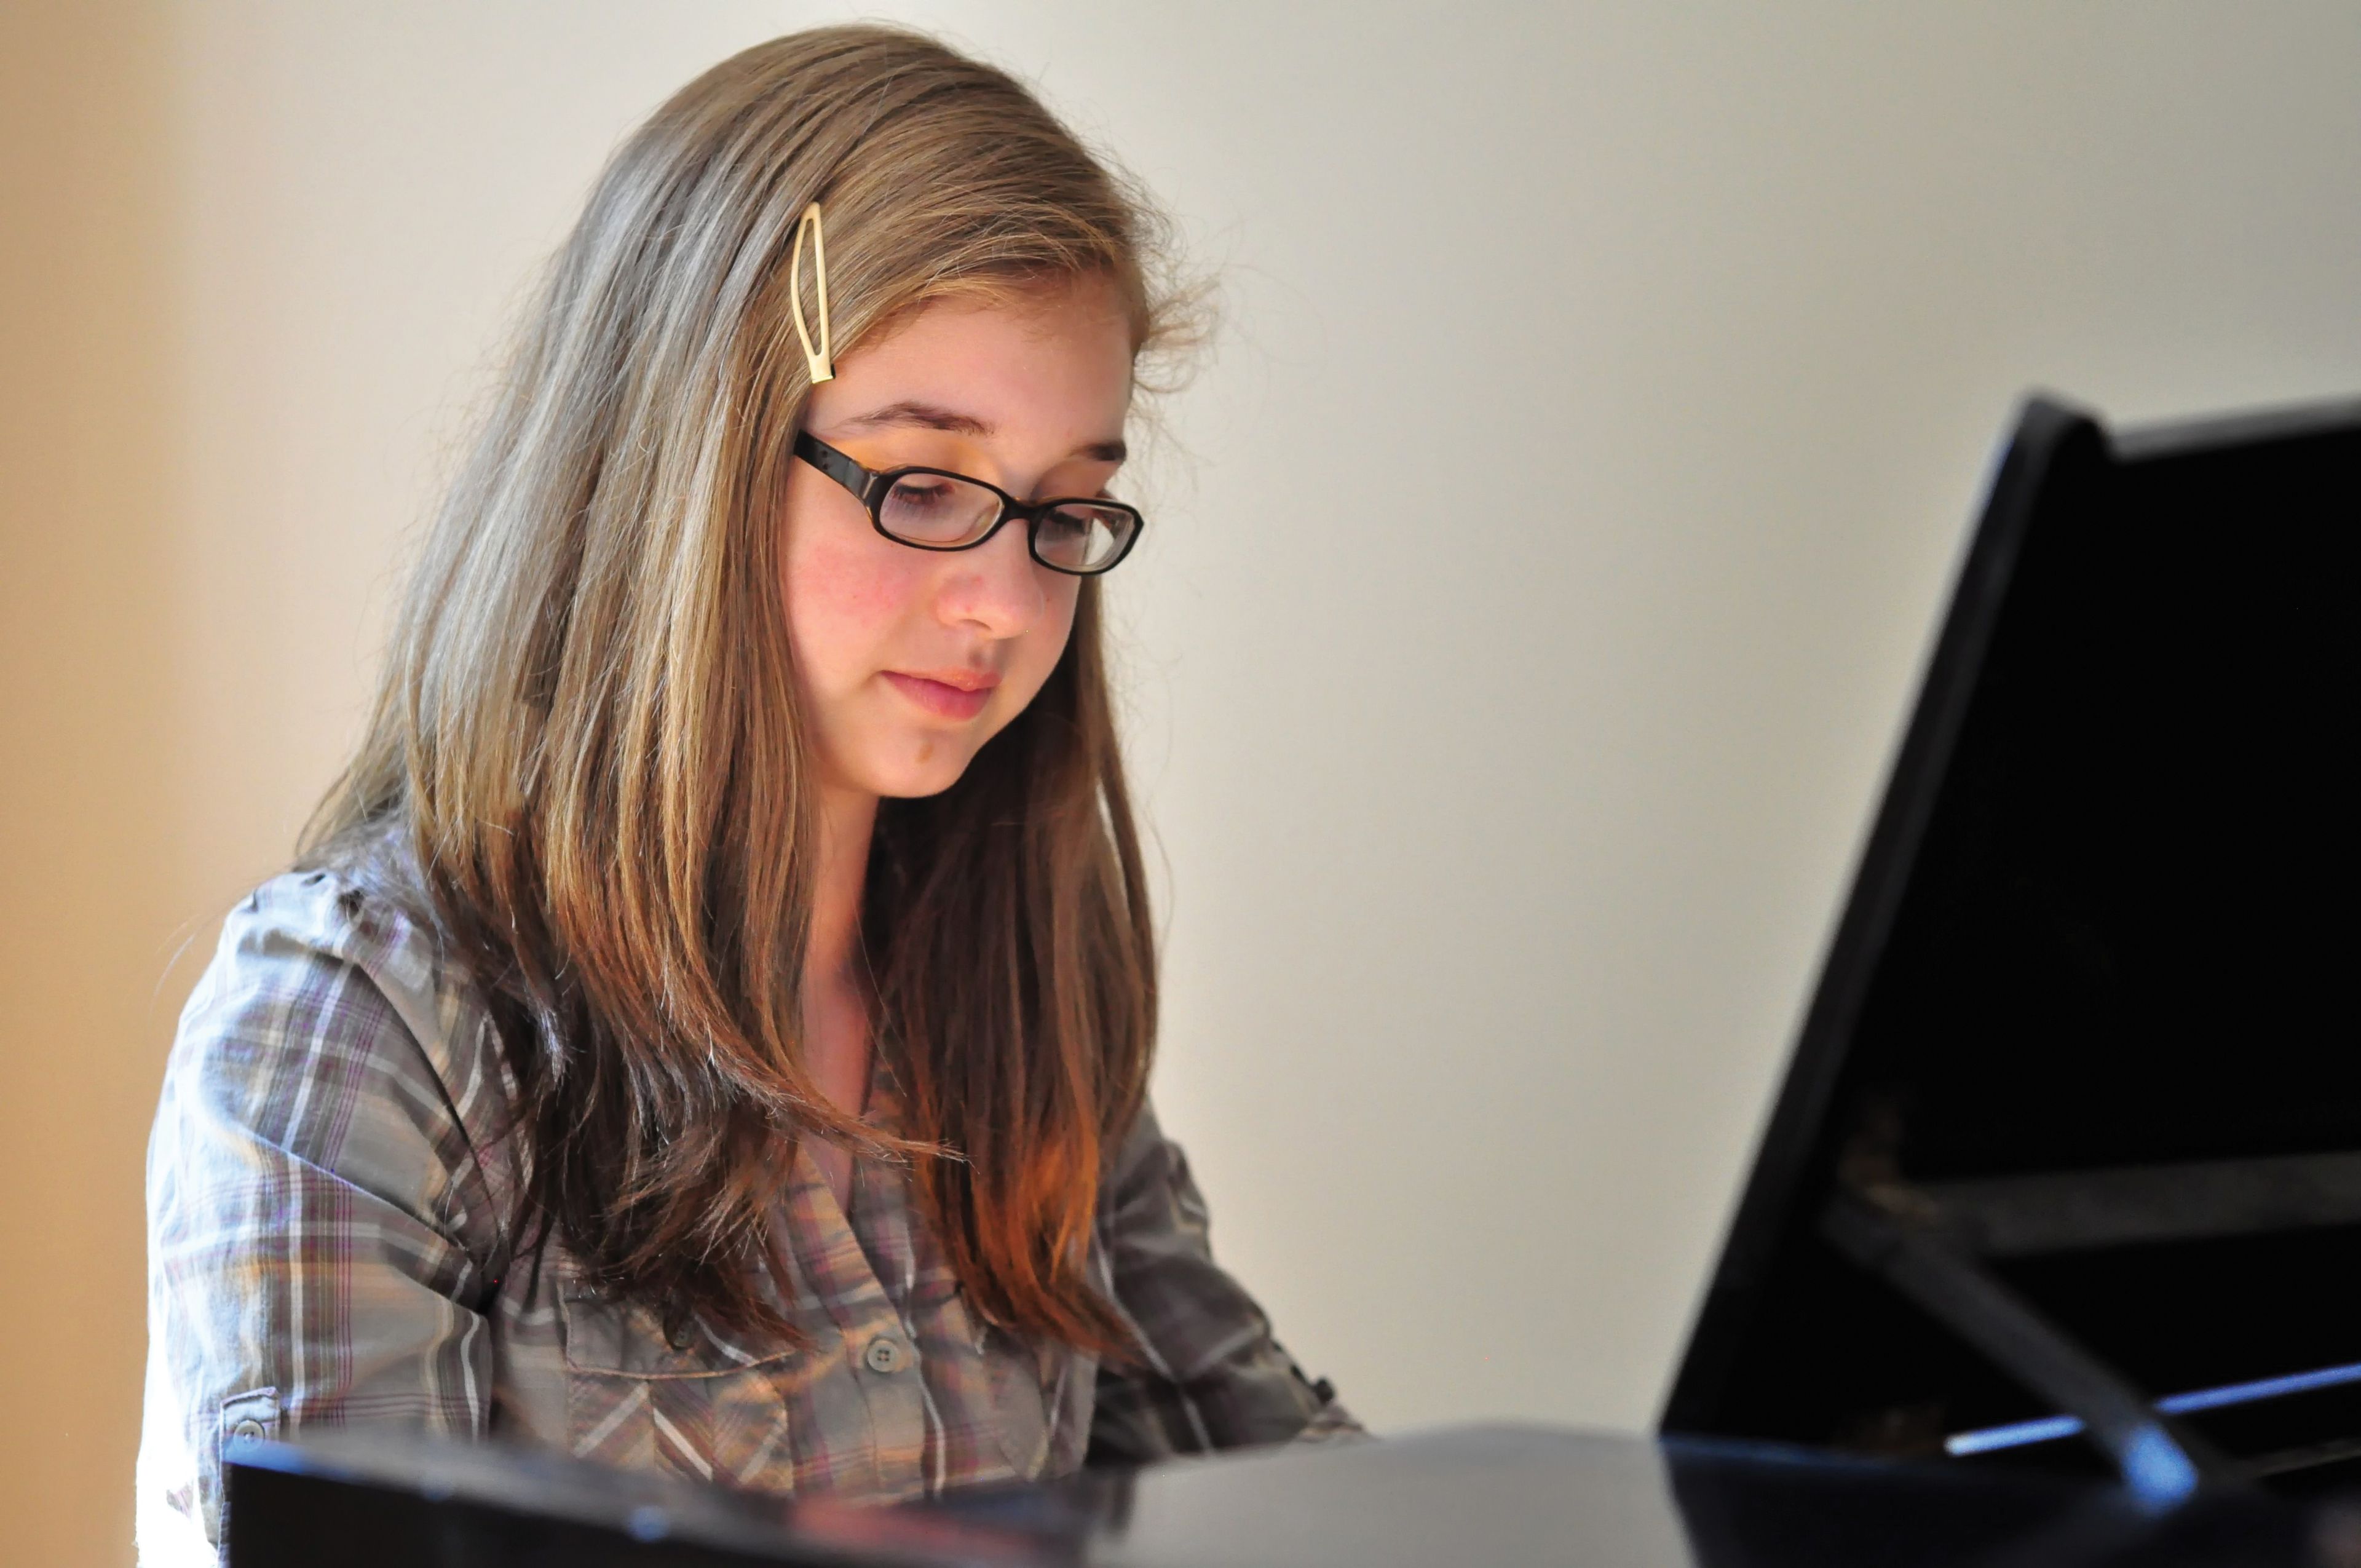 A young woman plays the piano.